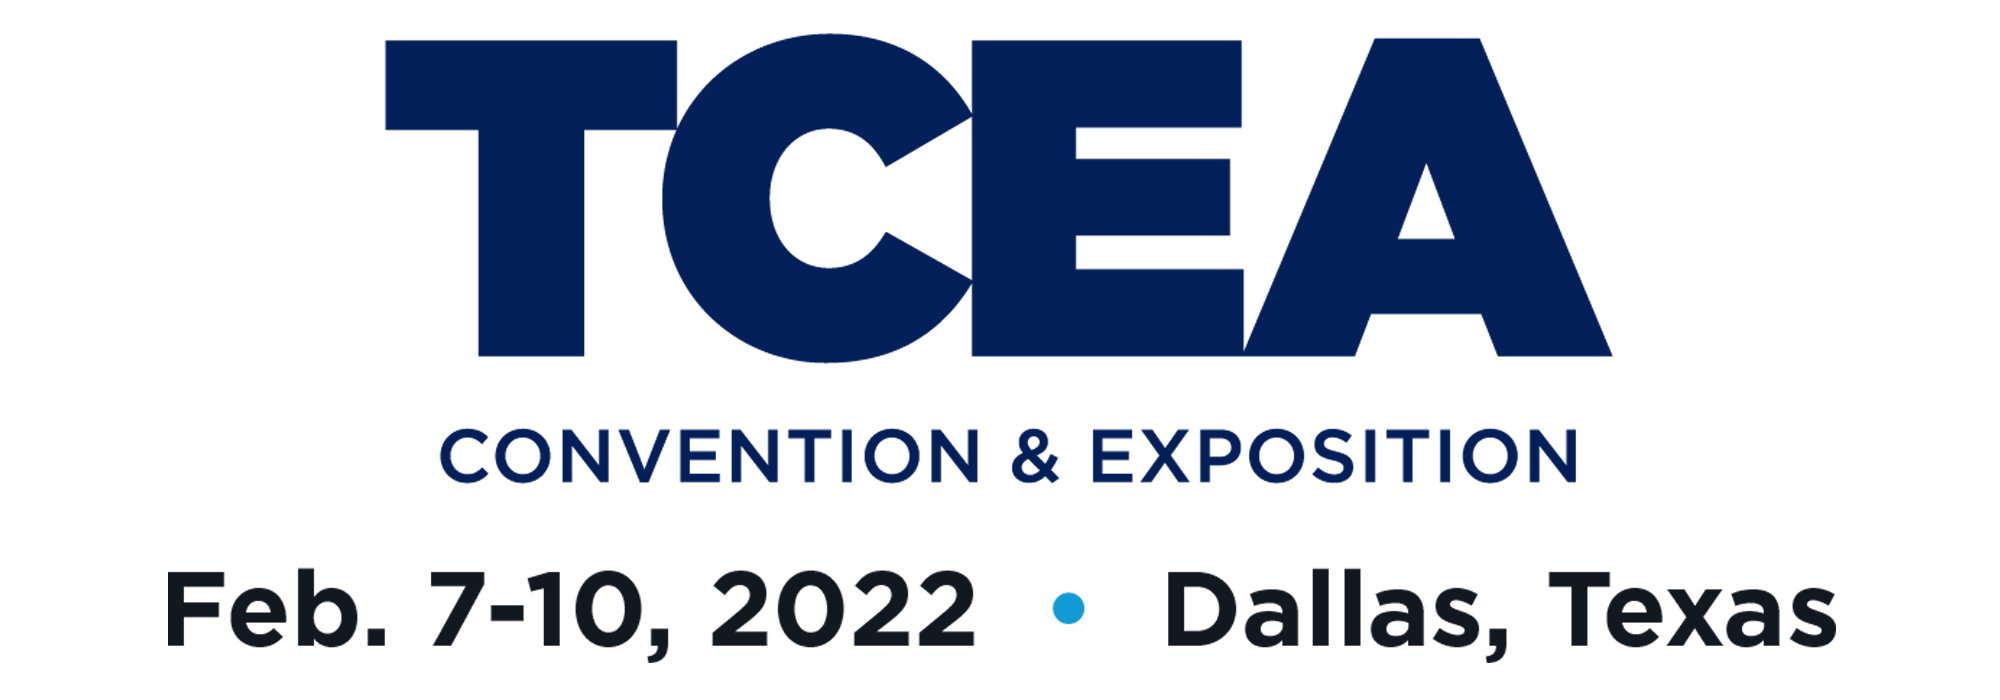 ViewSonic Showcases Latest Collaboration Tools and Display Technologies at TCEA 2022